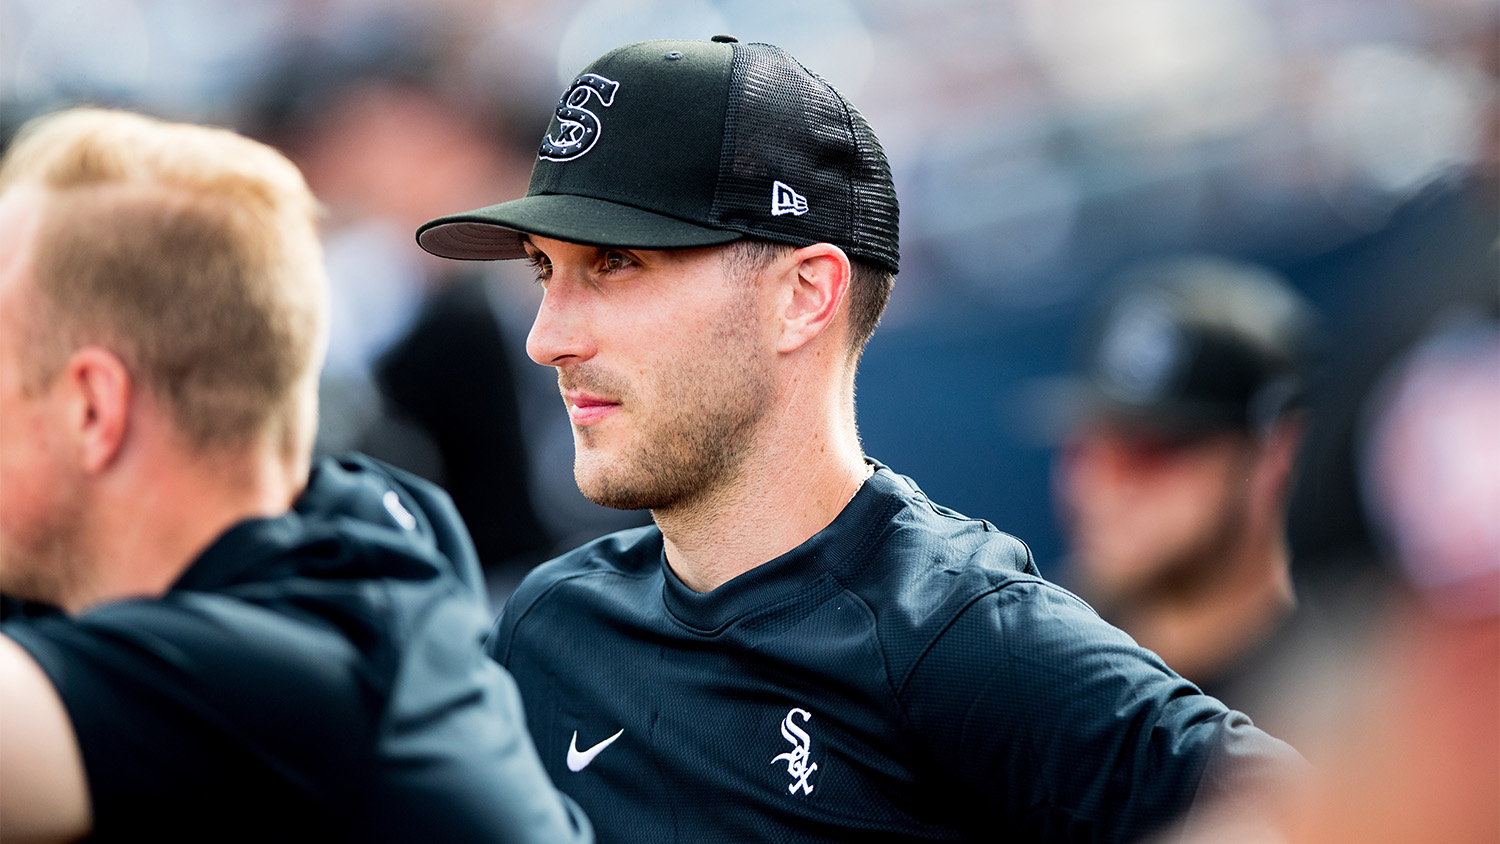 Logan Jones in the dugout during a Chicago White Sox game